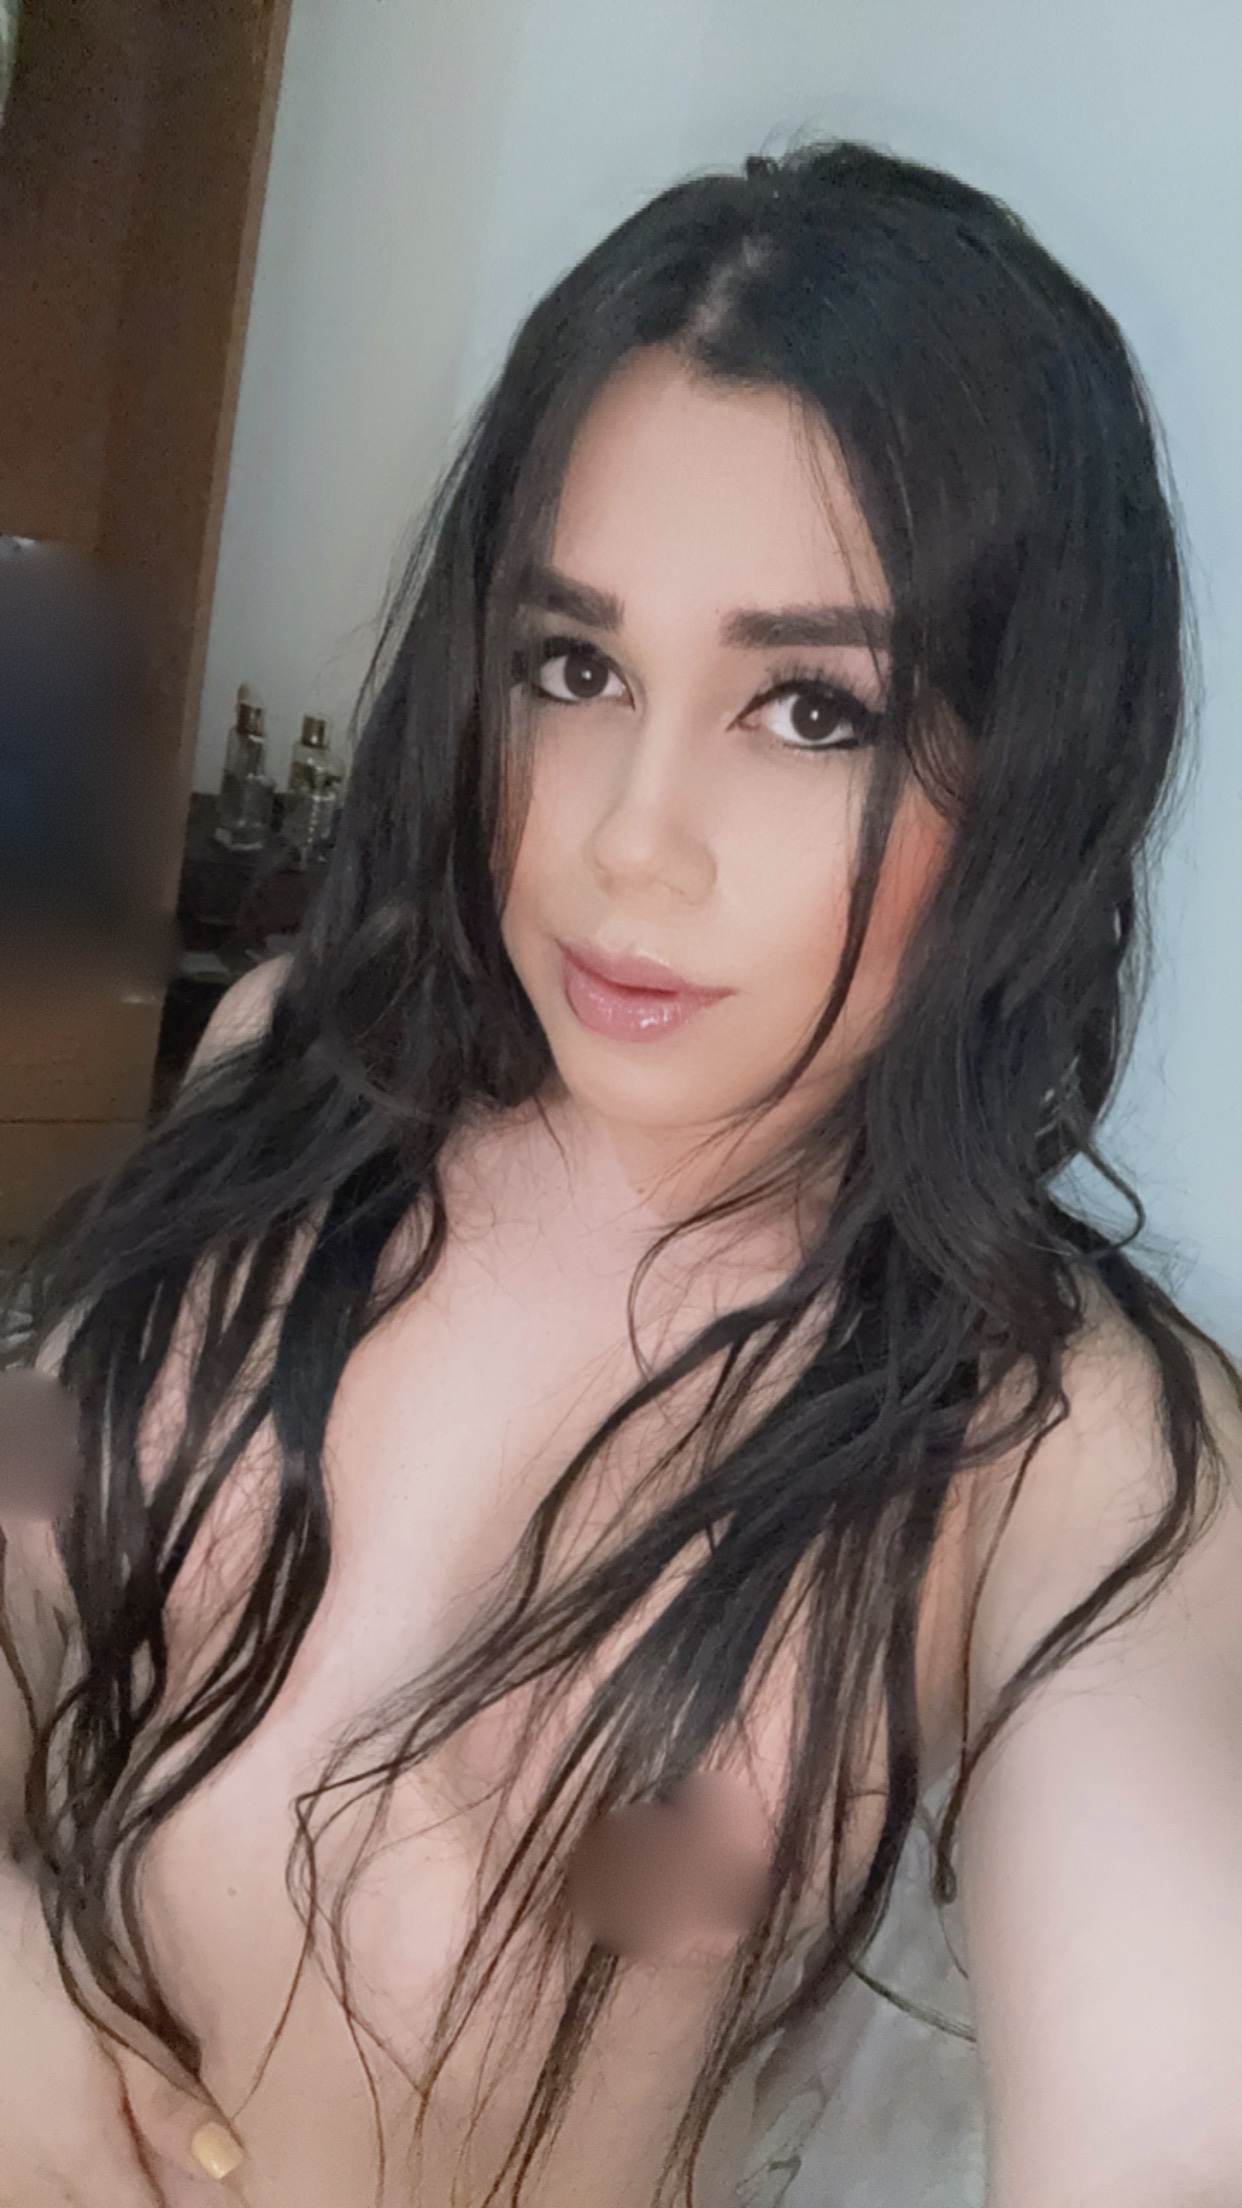 YOUNG AND VERY FEMININE, I AM VERY HOT AND EAGER FOR YOUR SWEET COCK AND AS